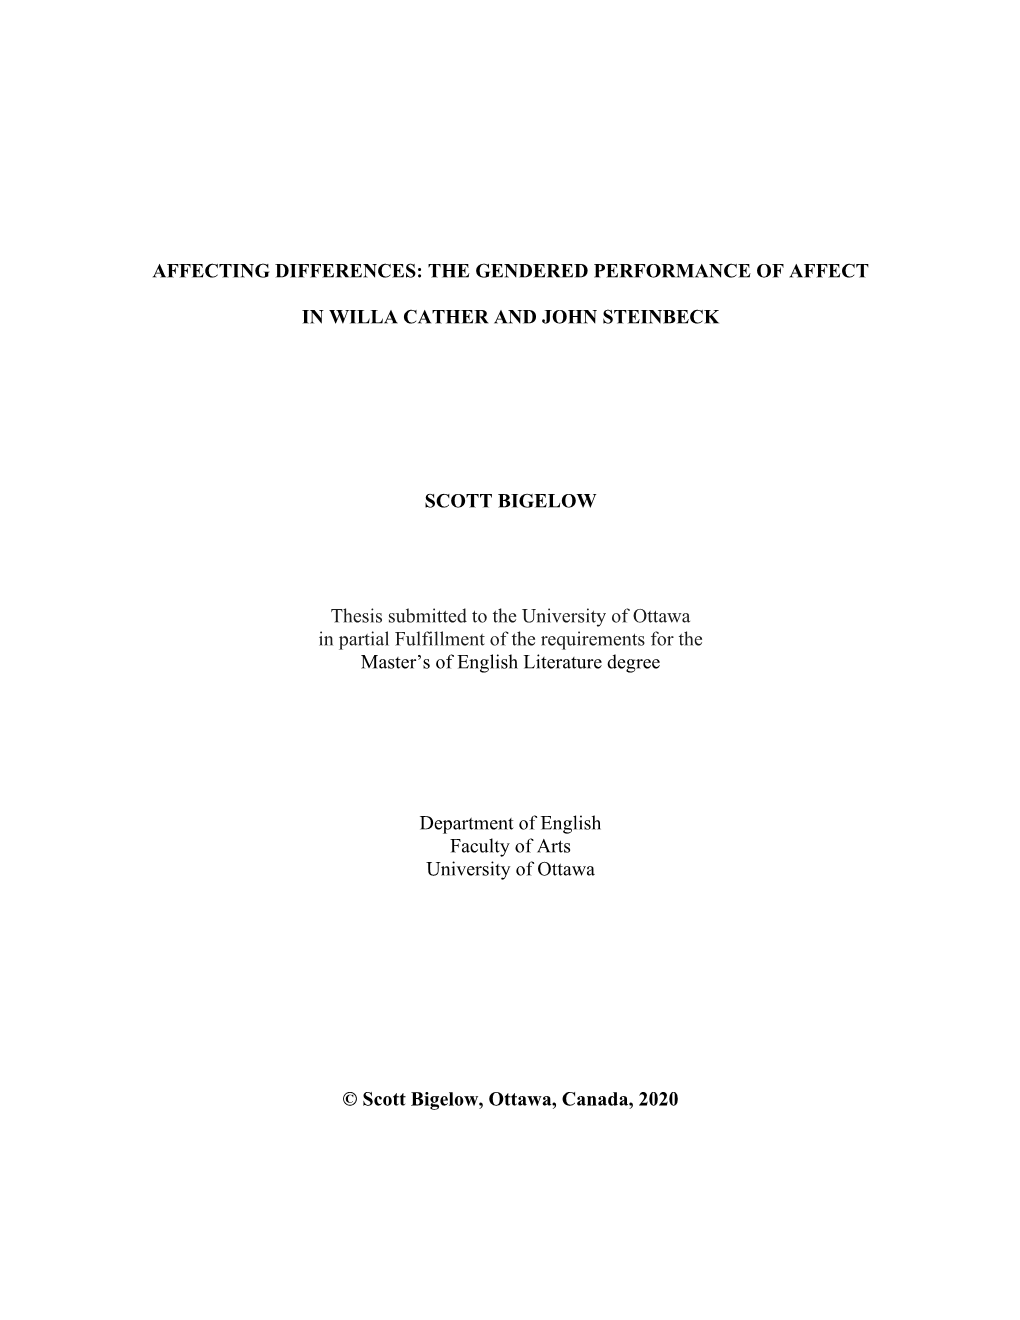 AFFECTING DIFFERENCES: the GENDERED PERFORMANCE of AFFECT in WILLA CATHER and JOHN STEINBECK SCOTT BIGELOW Thesis Submitted To